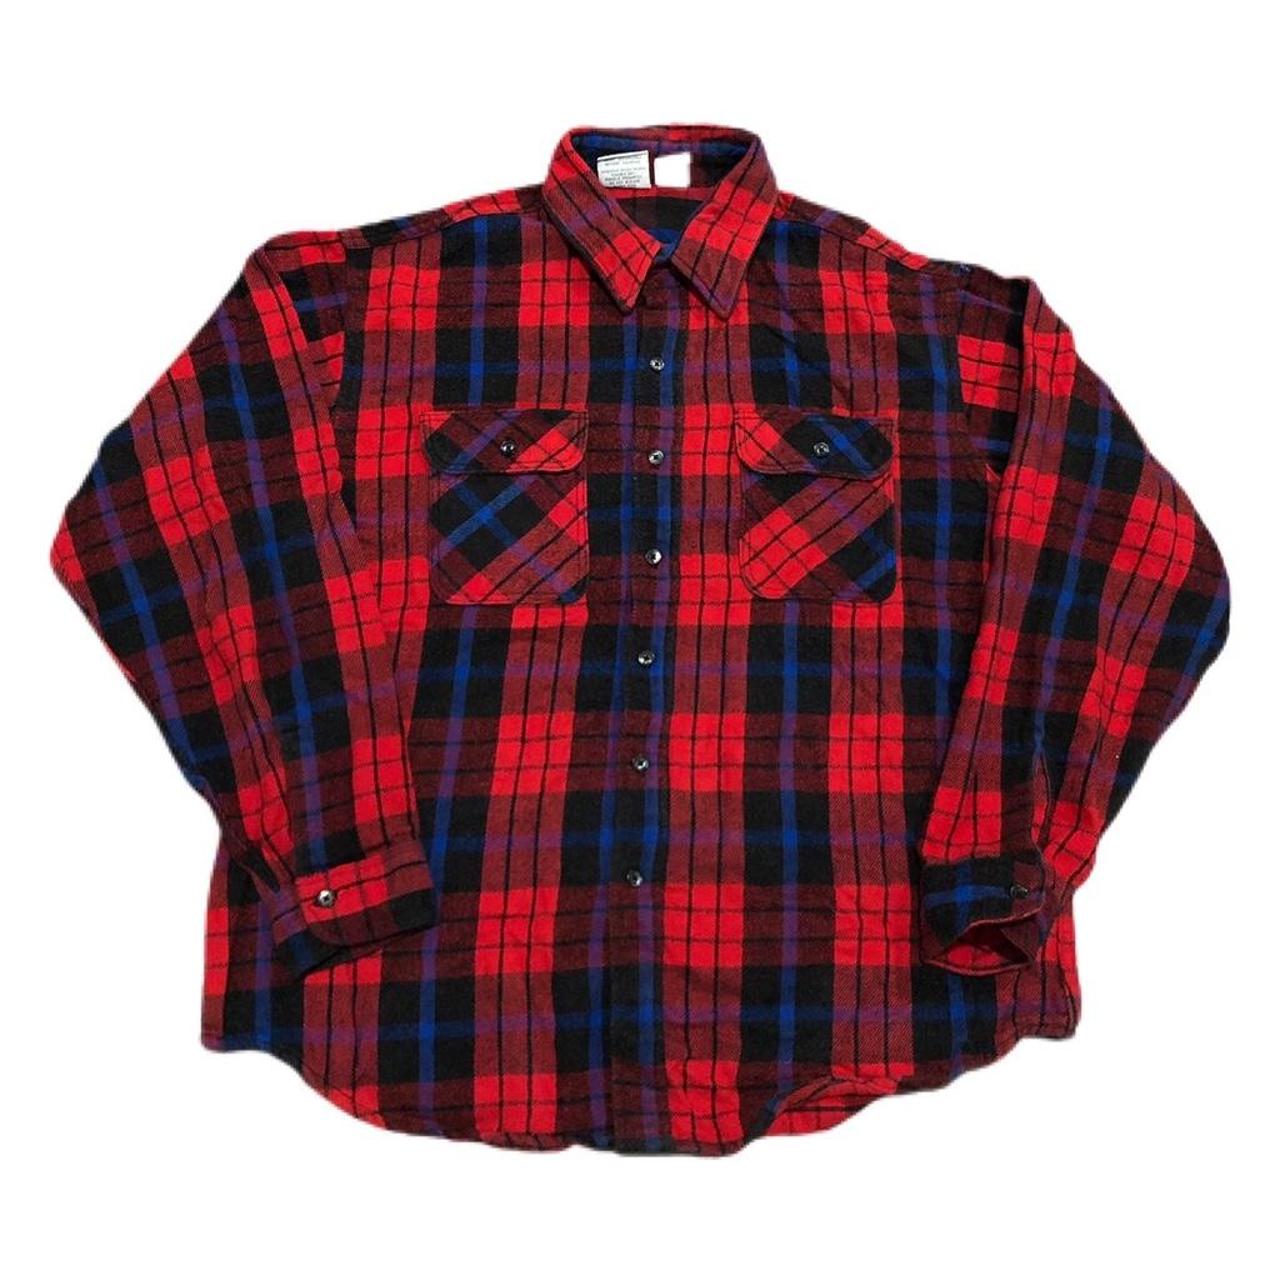 Product Image 1 - Vintage Prentiss Outdoors Flannel
Size XL